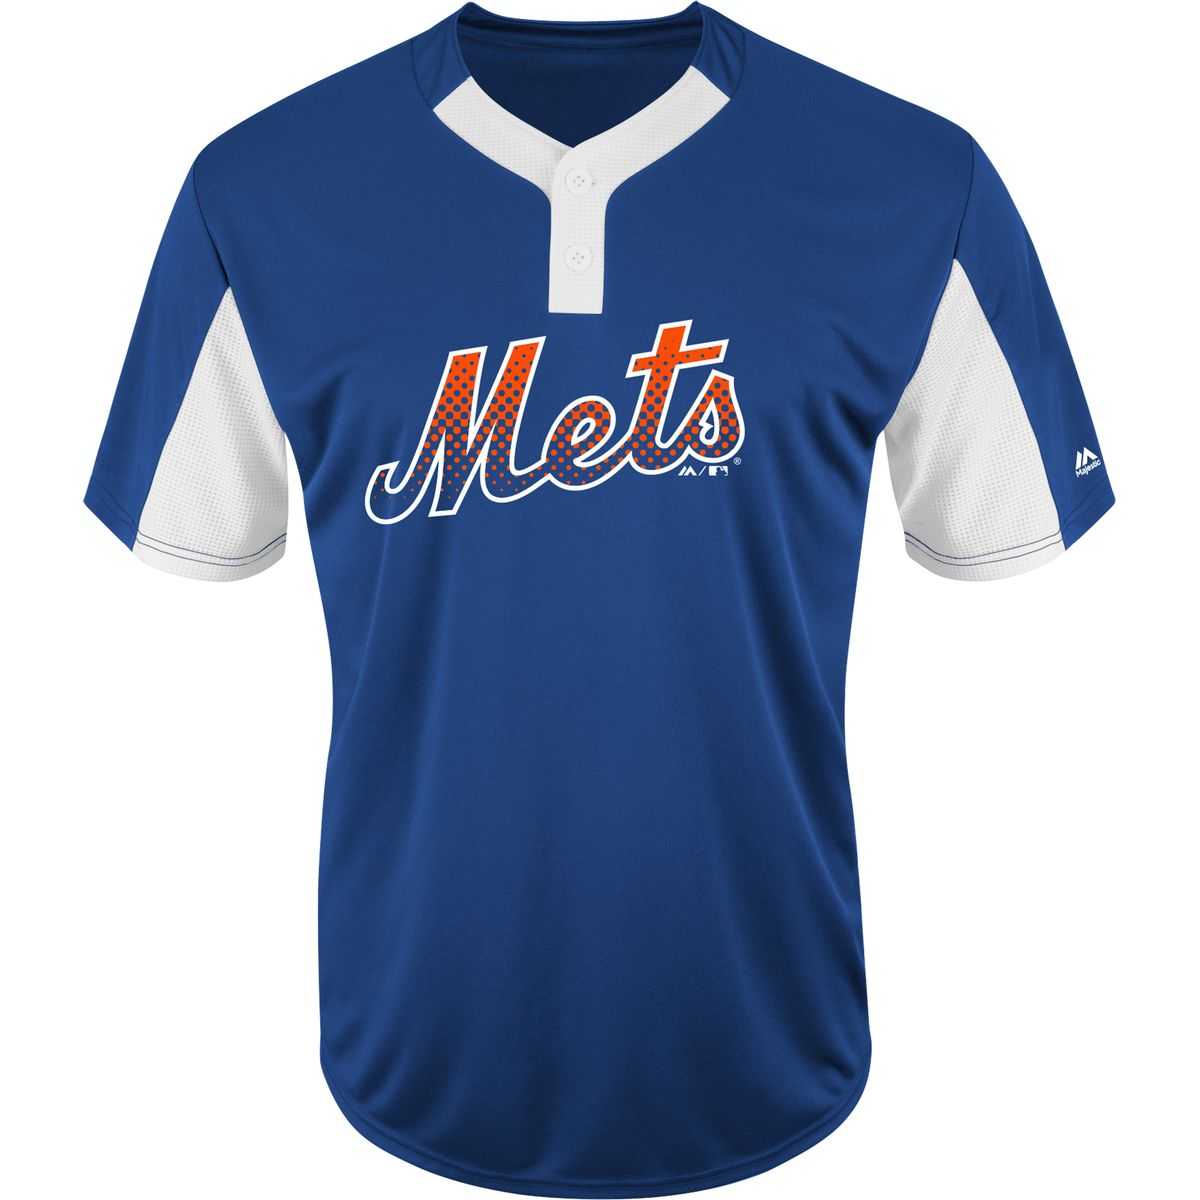 Majestic IY83-I383 MLB Premier Eagle 2-Button Jersey - New York Mets